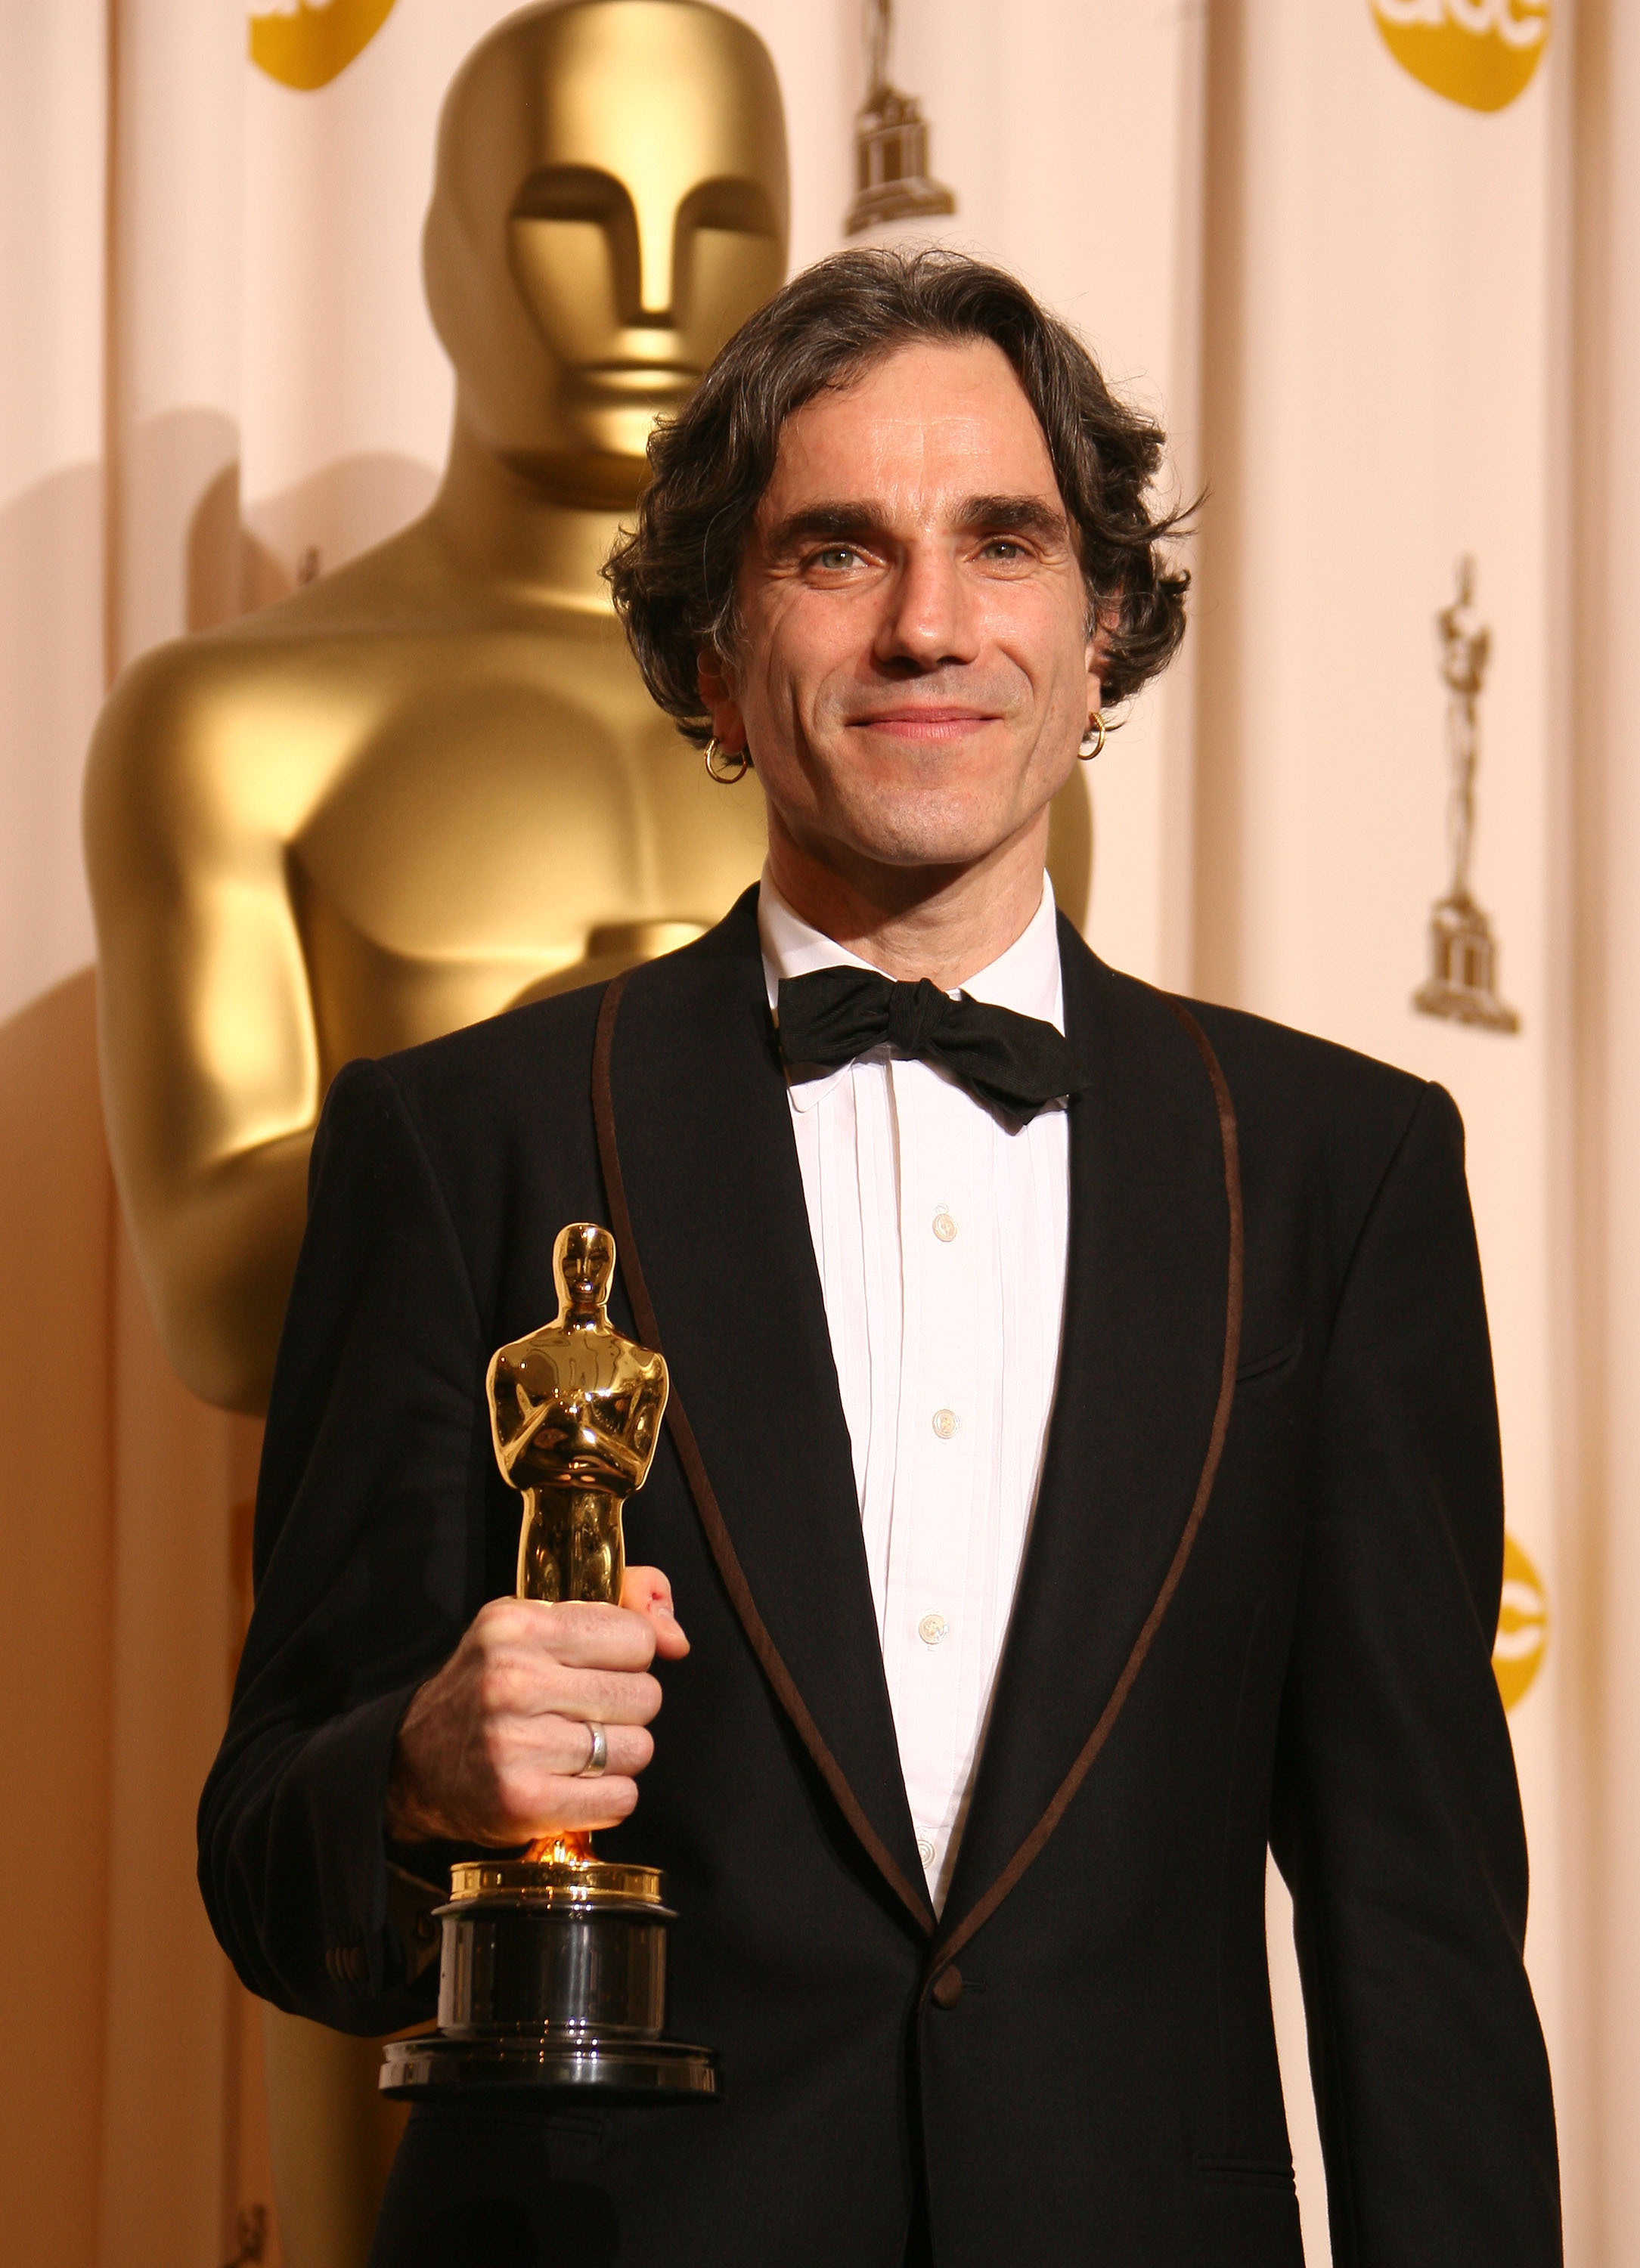 Daniel Day-Lewis during the 80th Annual Academy Awards on February 24, 2008 in Los Angeles, California | Source: Getty Images